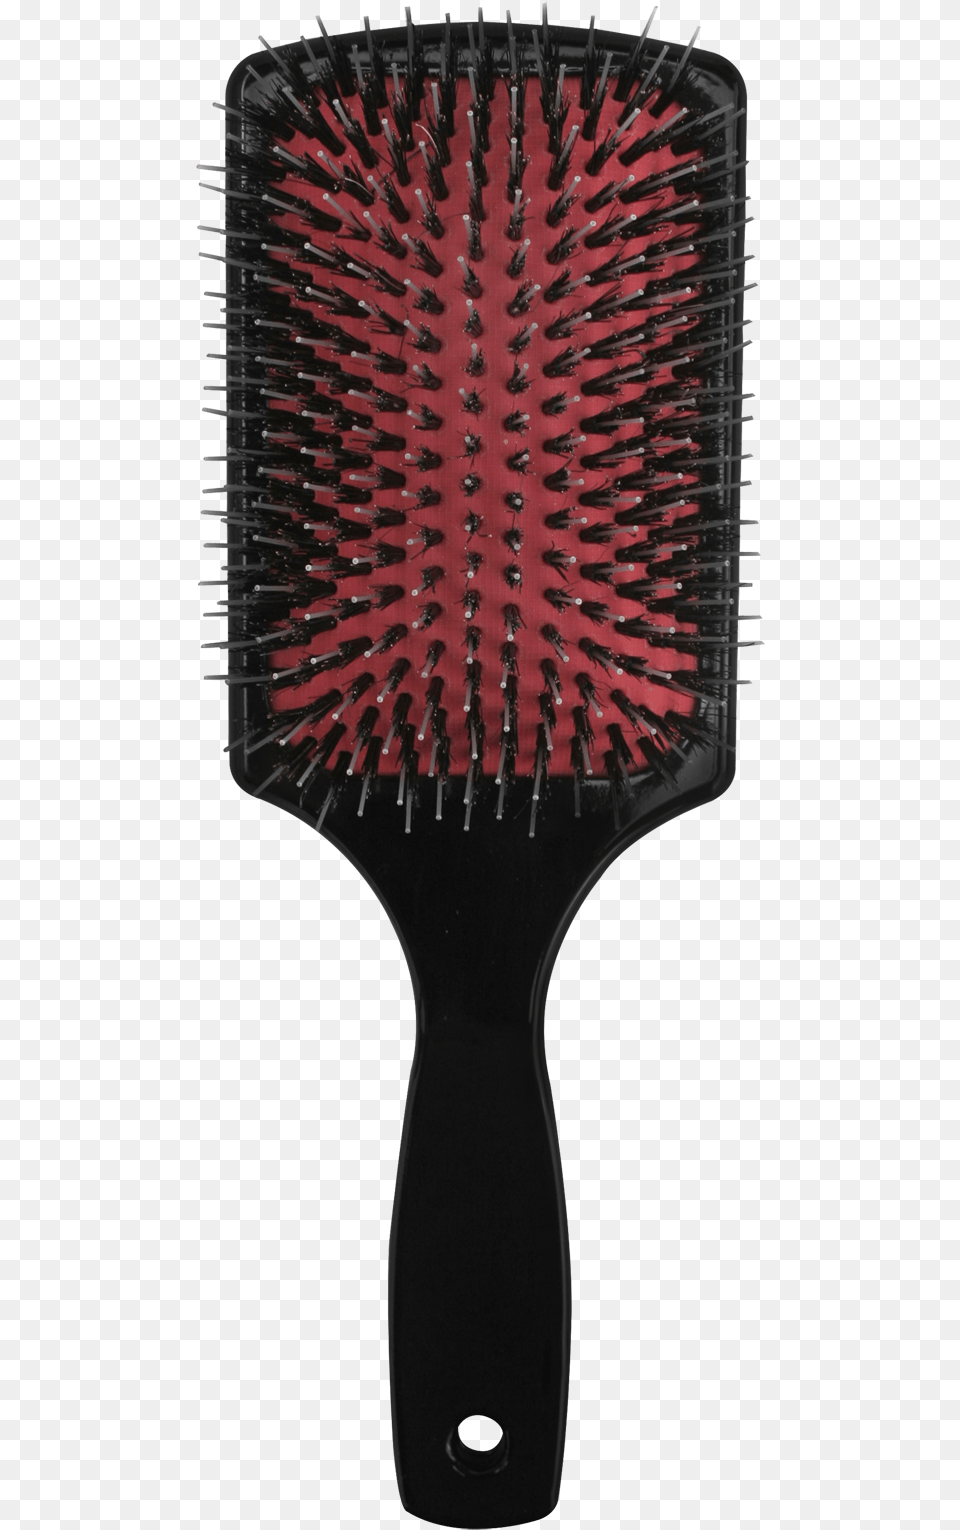 Oranjollie Hair Brush For Extensions Square Pattern Makeup Brushes, Device, Tool, Smoke Pipe Free Transparent Png